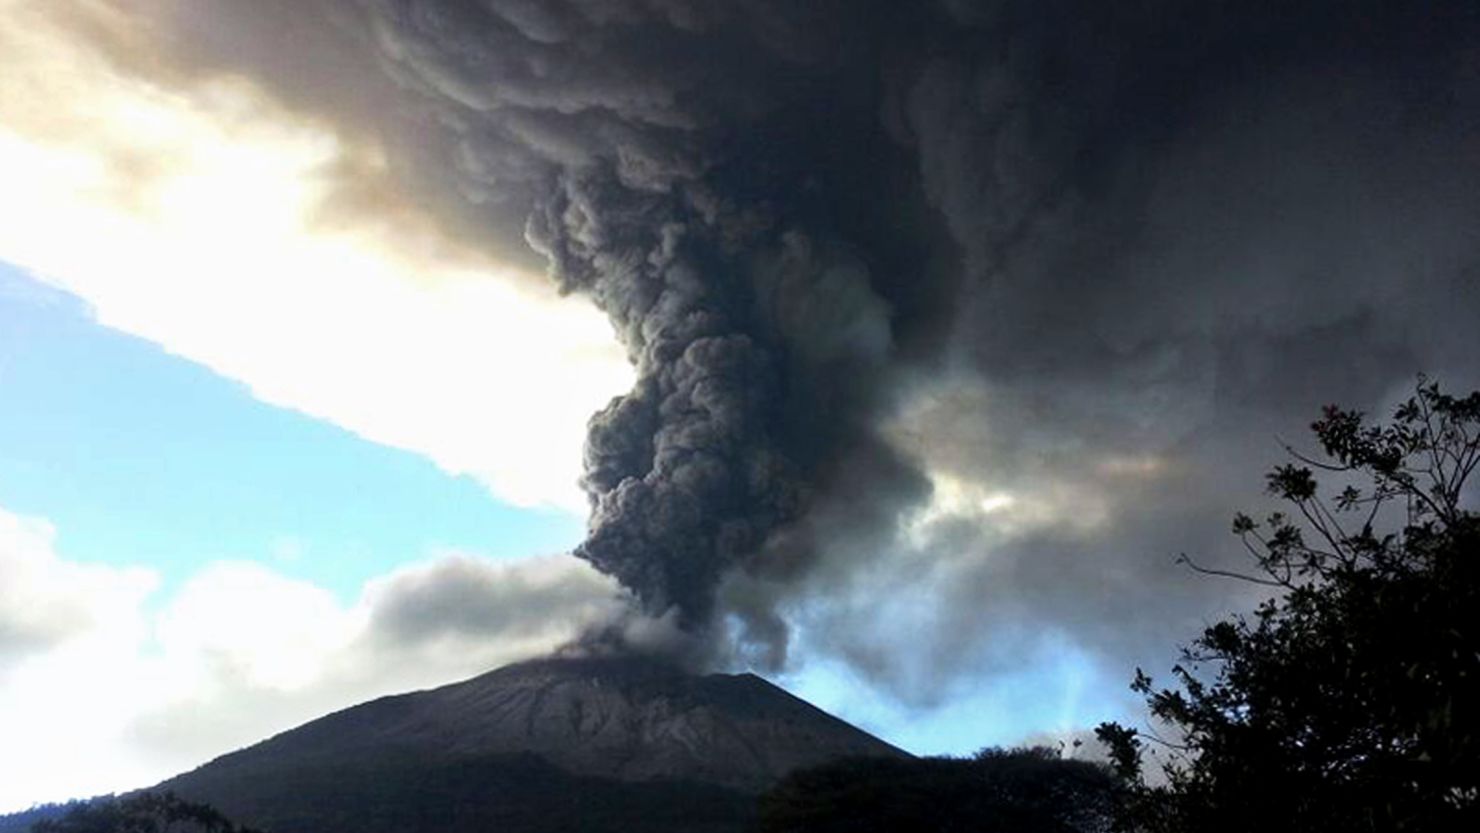 View of the Chaparrastique volcano spewing ashes and smoke in southern El Salvador on December 29.